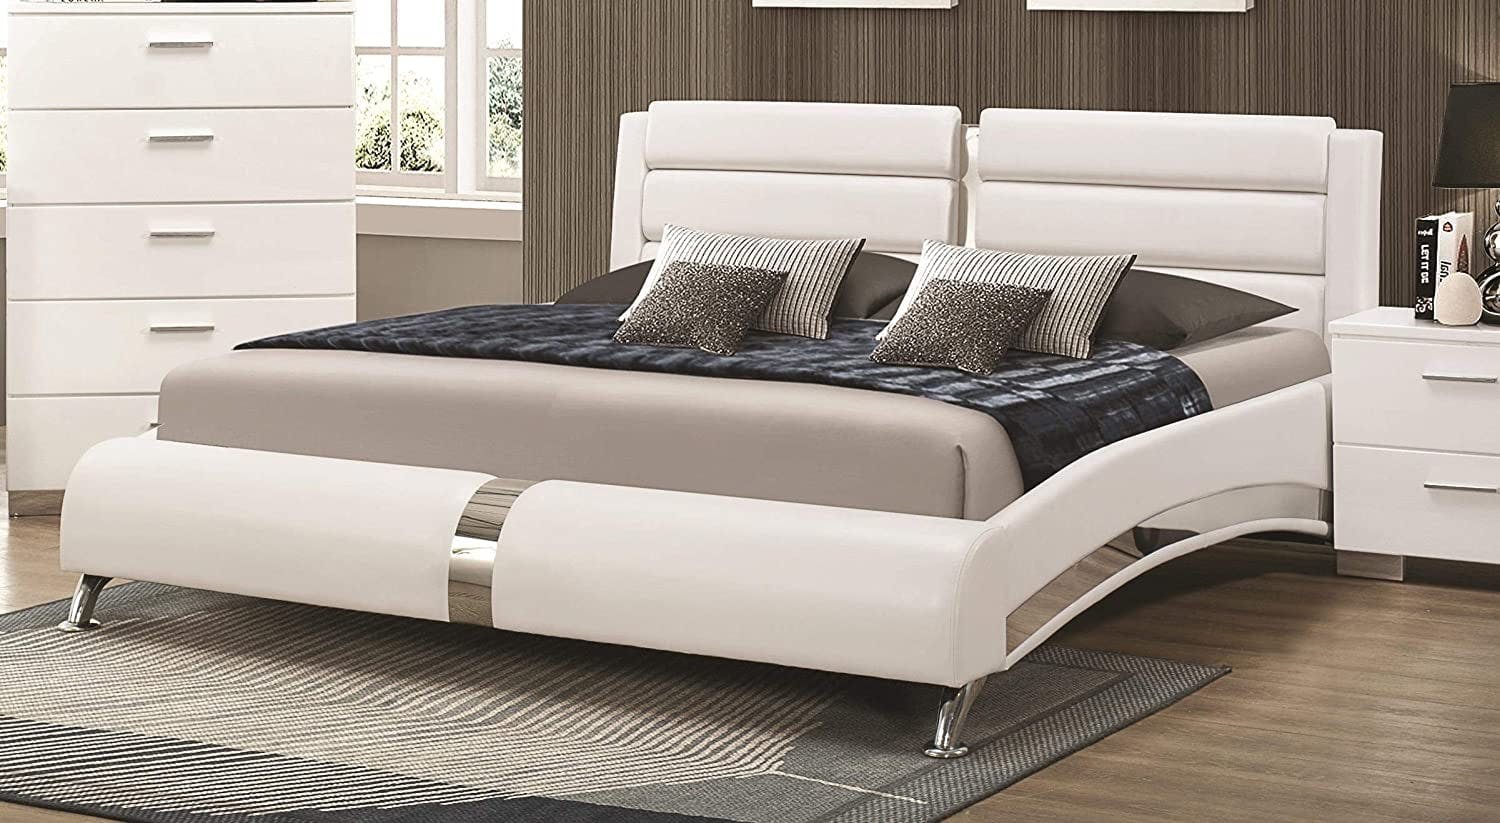 Sleek Eastern King White Faux Leather Bed with Chrome Accents